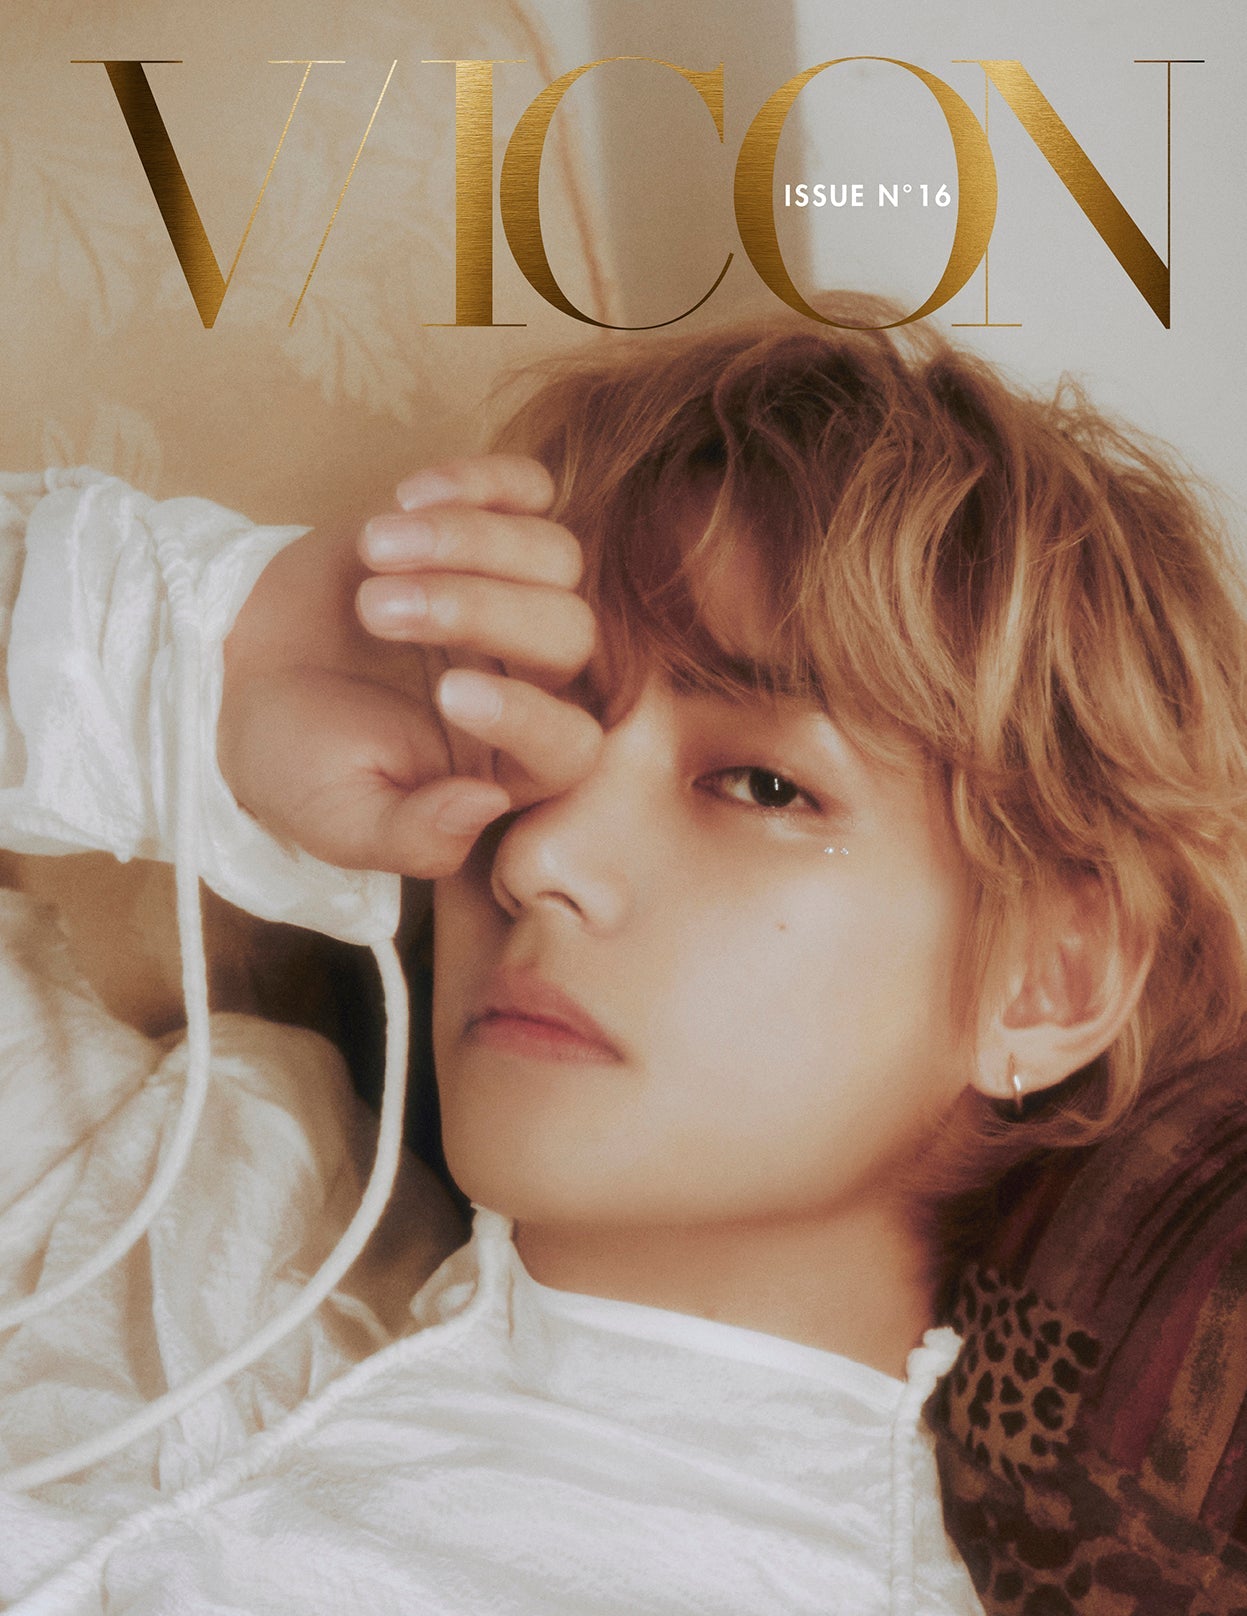 ◆BTS◆VICON テテ「a magazine about V」D-type